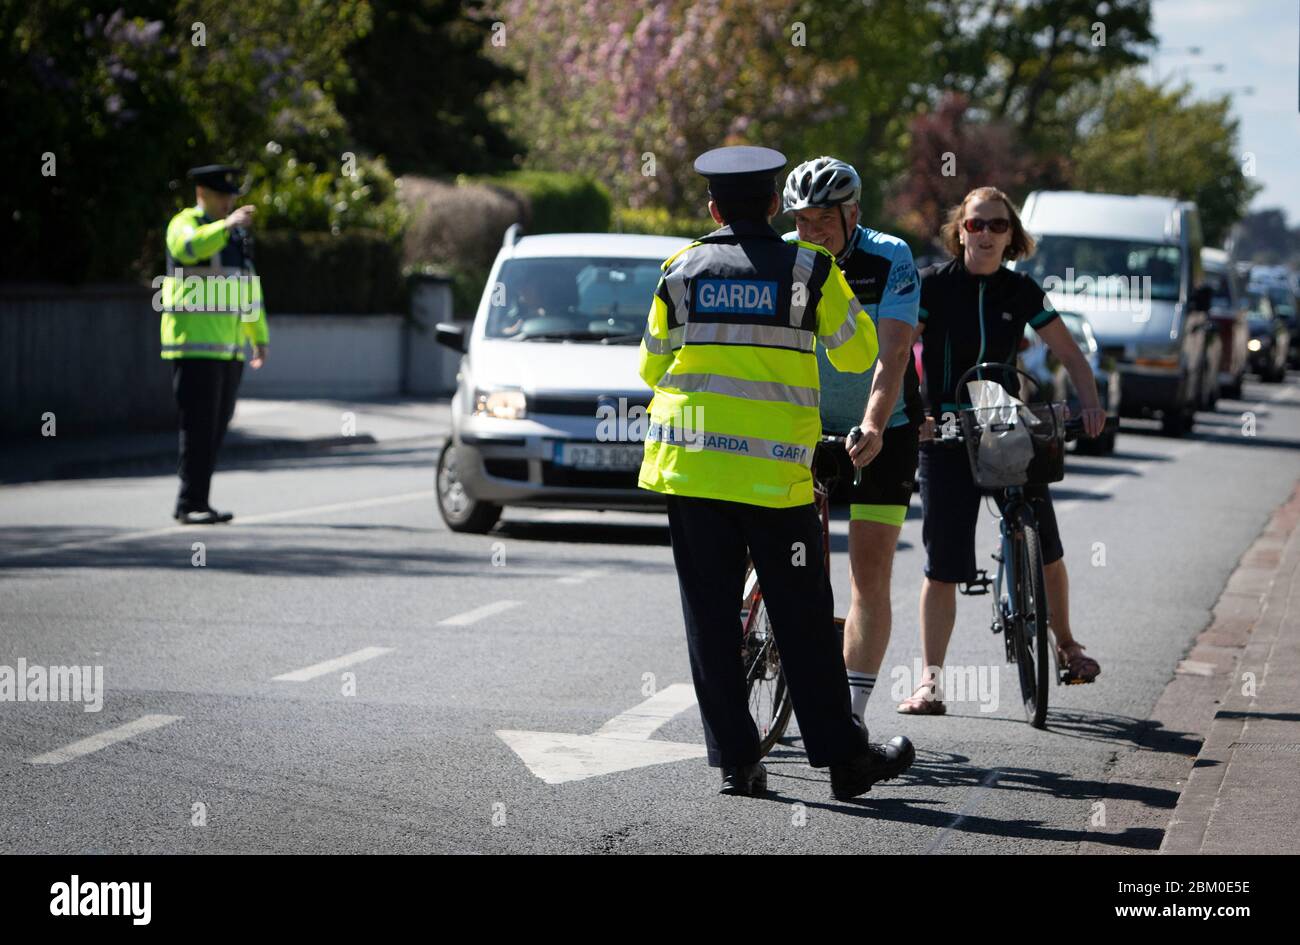 Dublin, Ireland - April 29, 2020: a Garda Covid-19 checkpoint at Sutton Cross just outside the city. Stock Photo